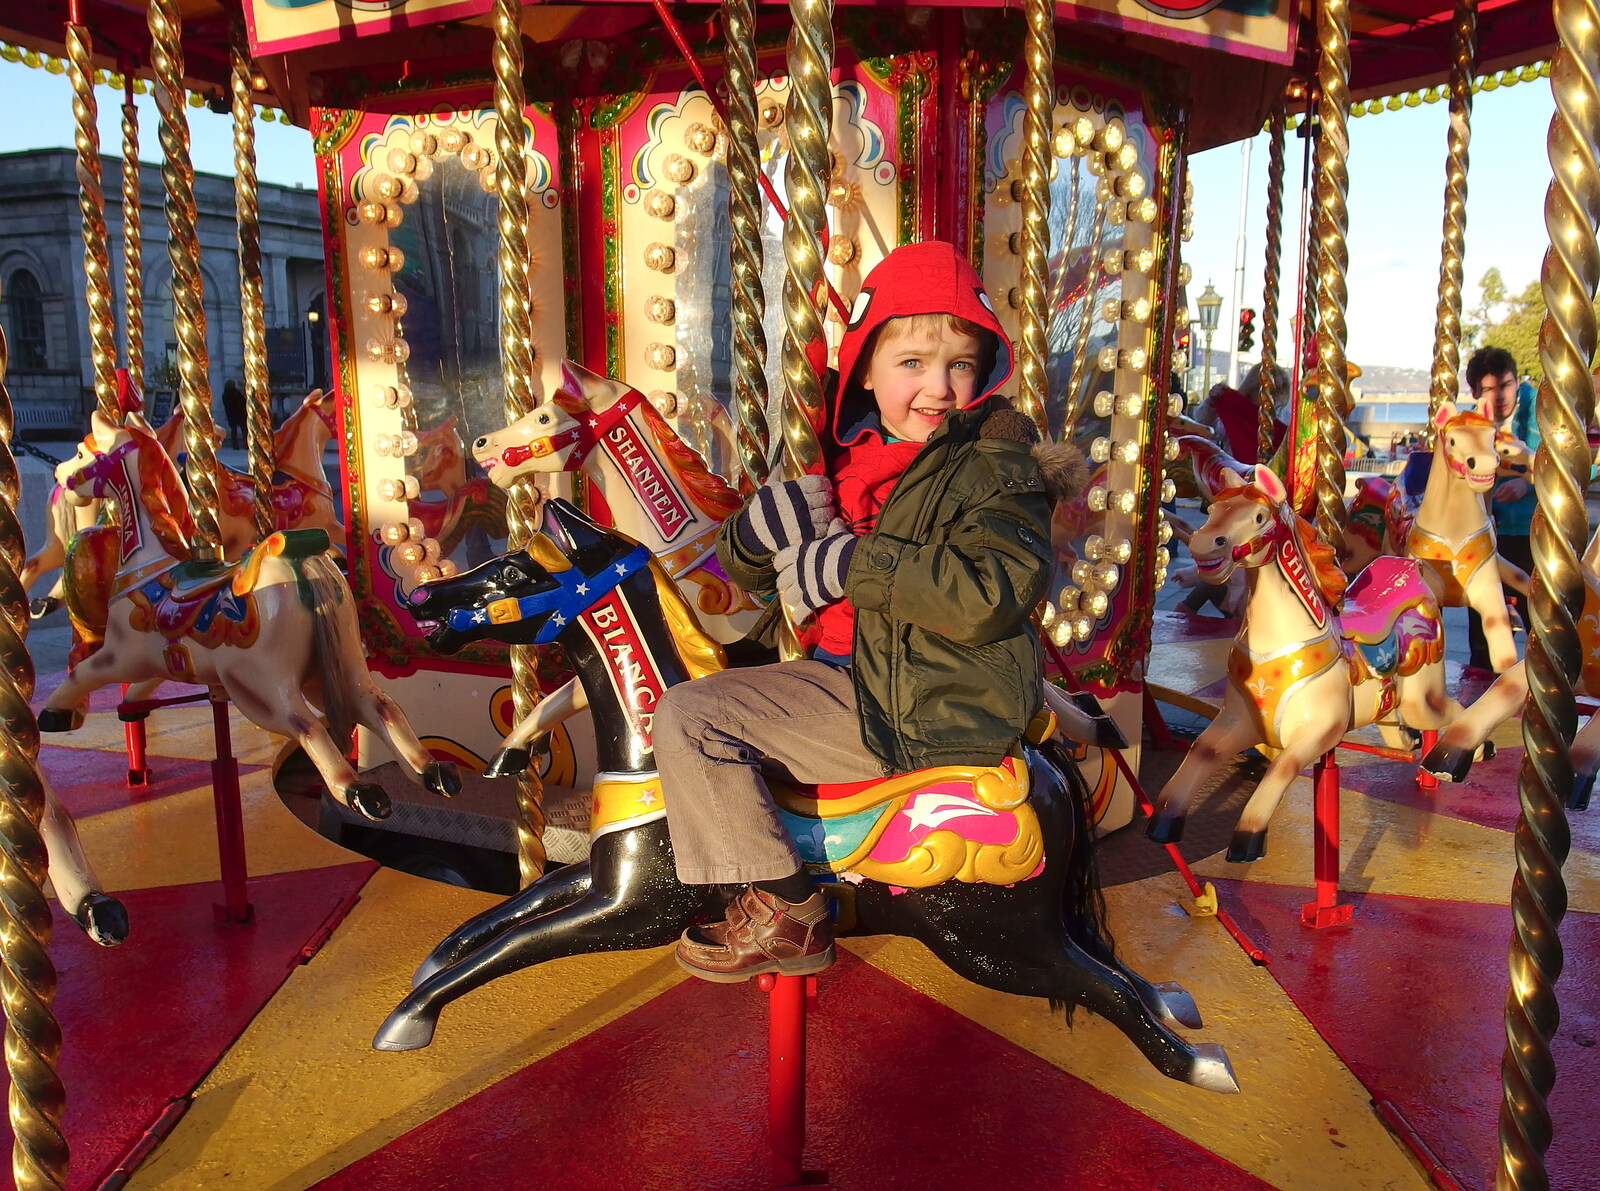 Fred on the mini gallopers from Dun Laoghaire and an Electrical Disaster, Monkstown, County Dublin, Ireland - 4th January 2014